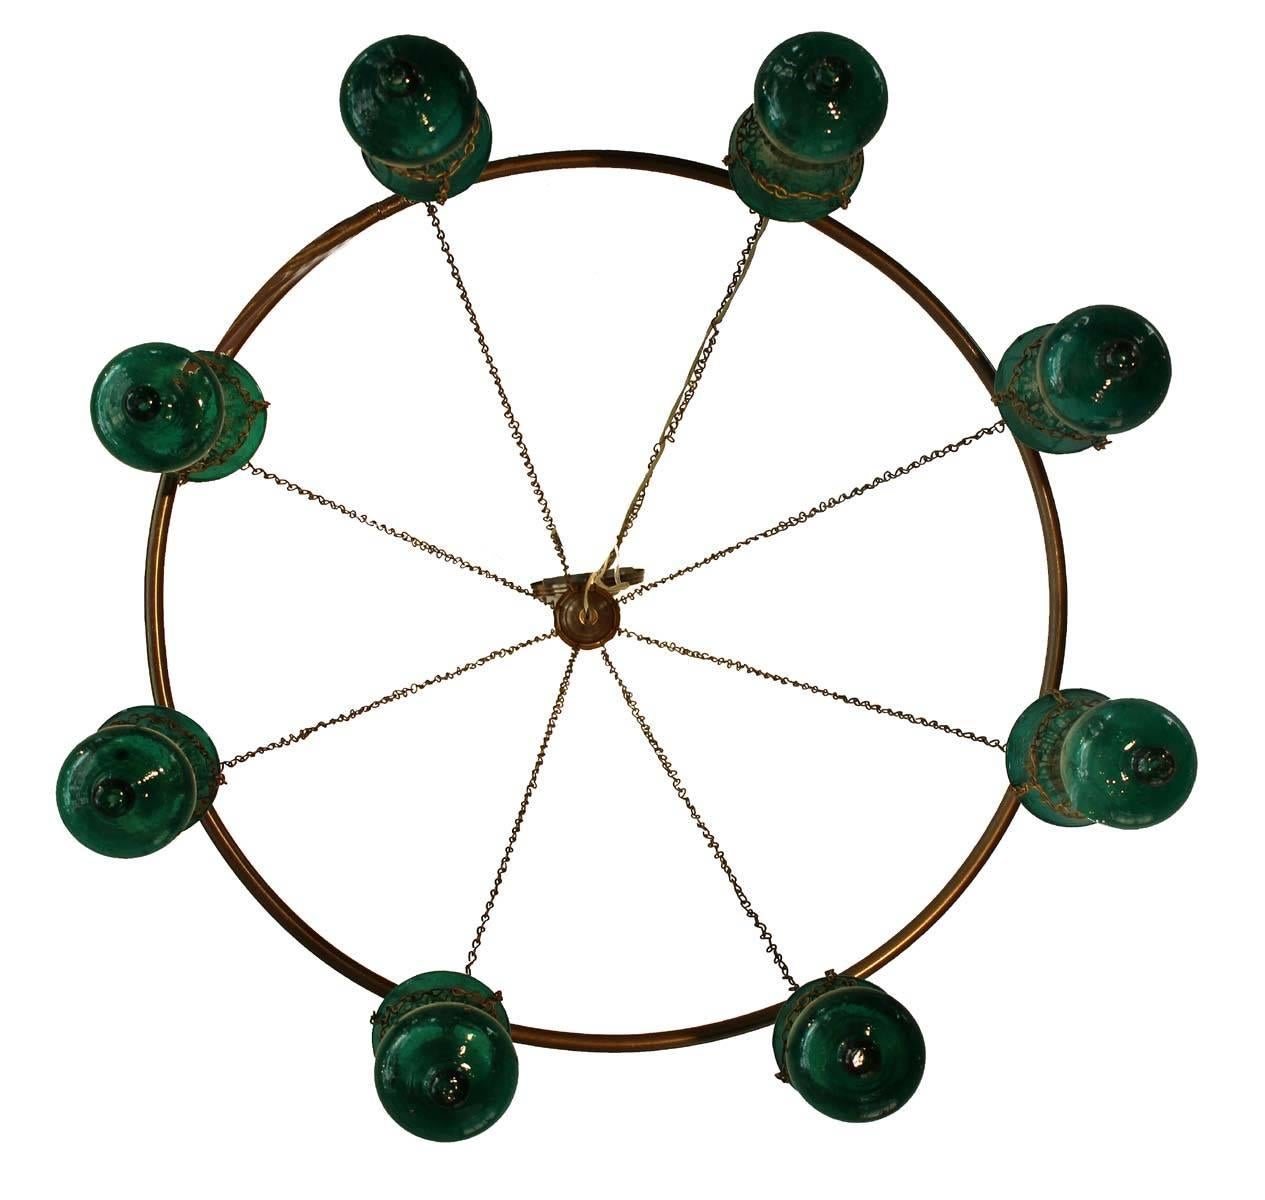 Amazing Egyptian glass chandelier. Eight jar large hand blown green glass with a brushed brass ring and chain. Amazing look and can be custom made in multiple sizes and colors. In the world of original lighting you will not find many options of this